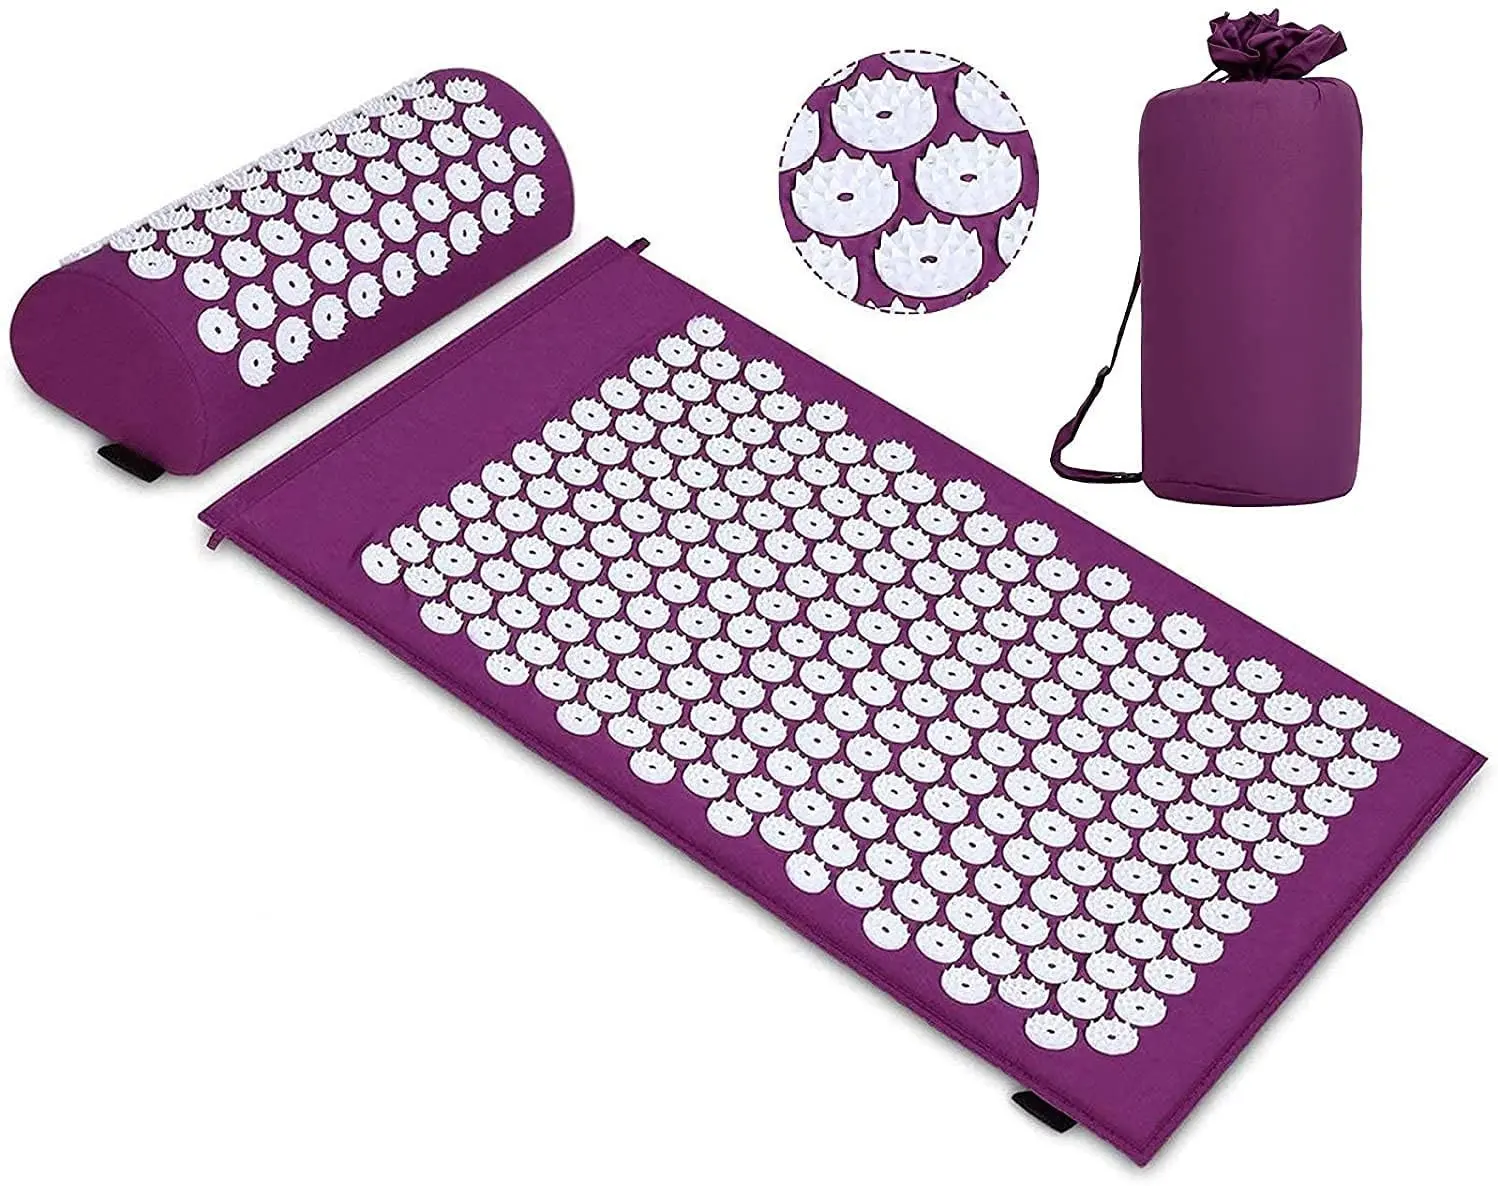 Acupressure mat and Pillow/Acupuncture mat/Massage mat for Wellness Relaxation and Tension Release